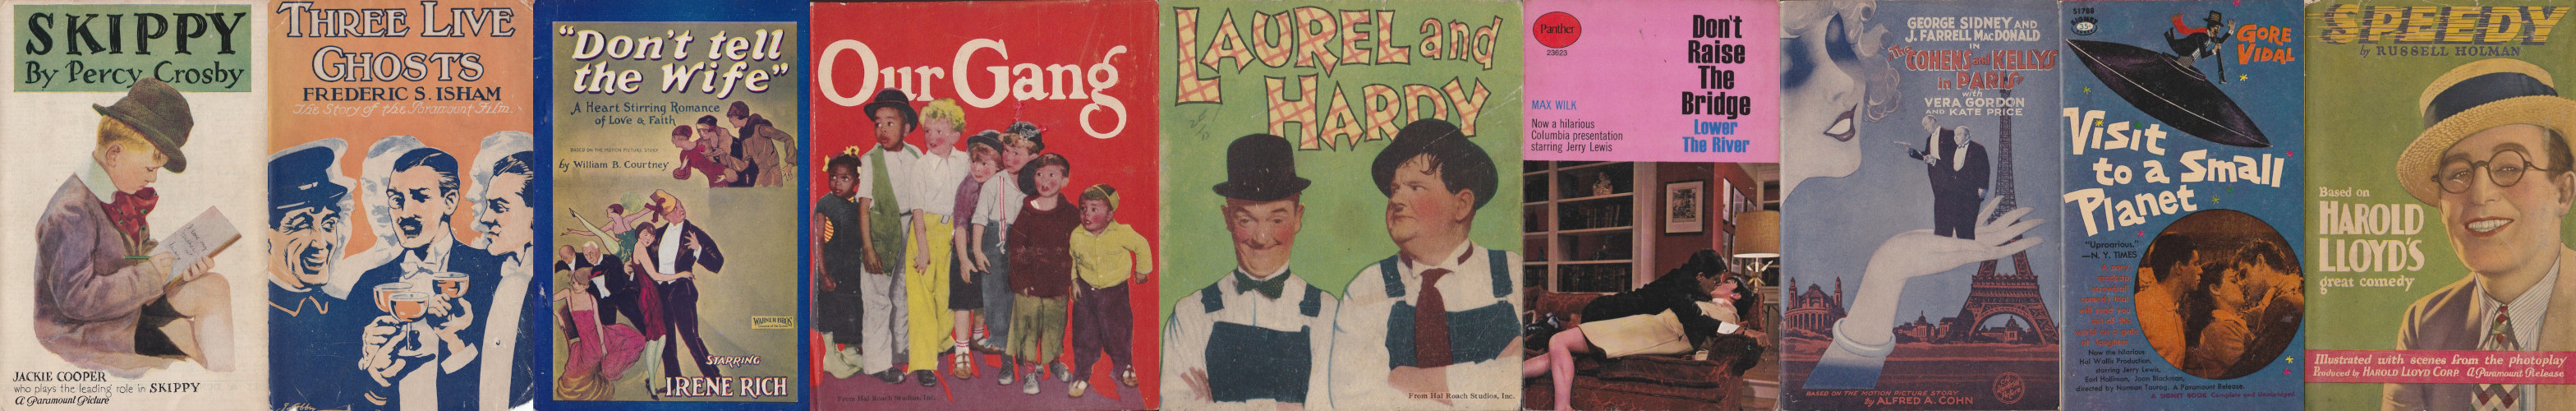 Comedy PhotoPlay Editions Hardcovers and Paperbacks